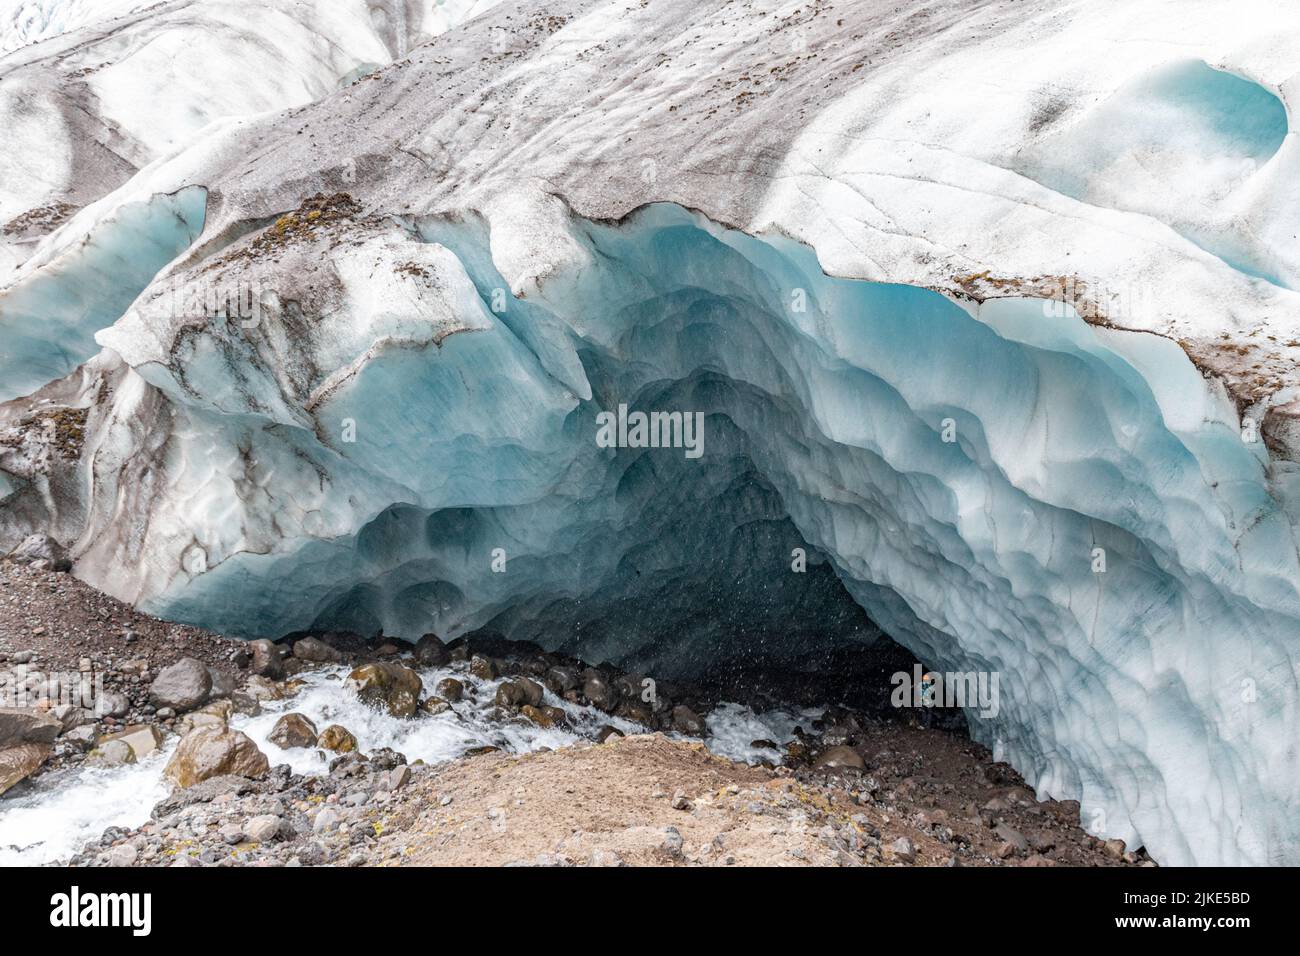 Ice cave in the Virkisjokull glacier tongue, an outlet of the Vatnajokull glacier in southern Iceland Stock Photo